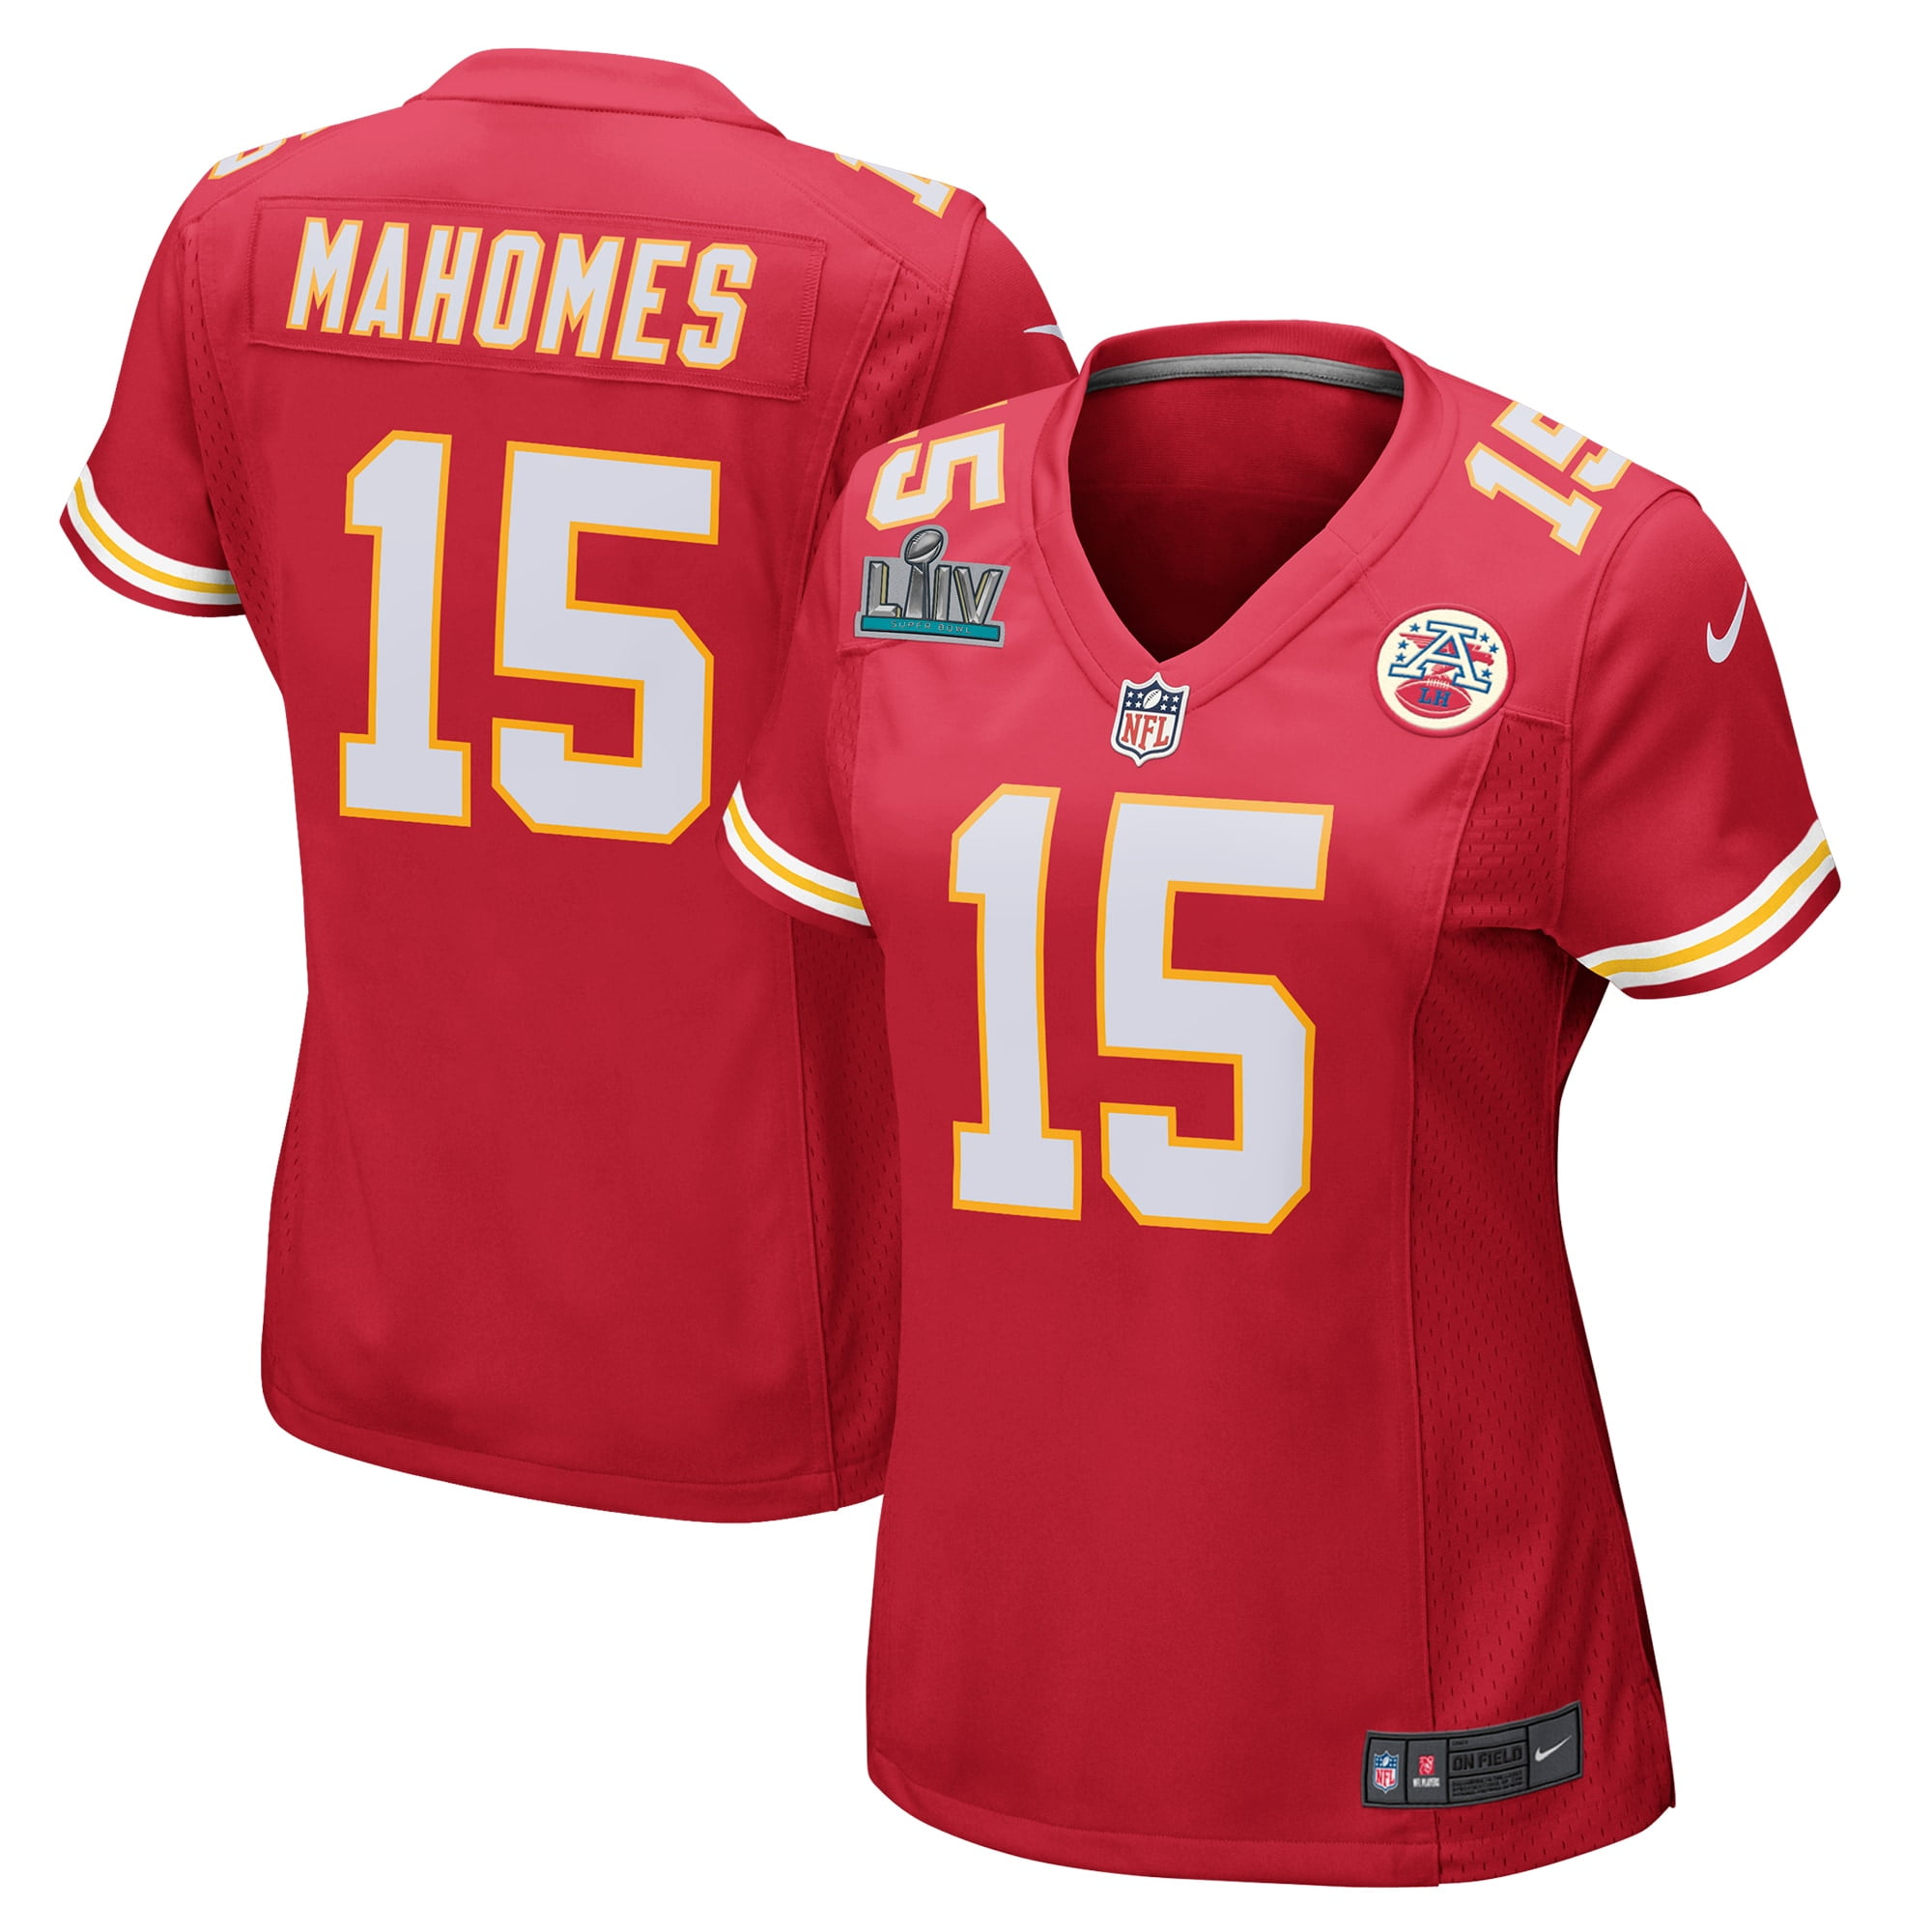 mahomes super bowl red jersey